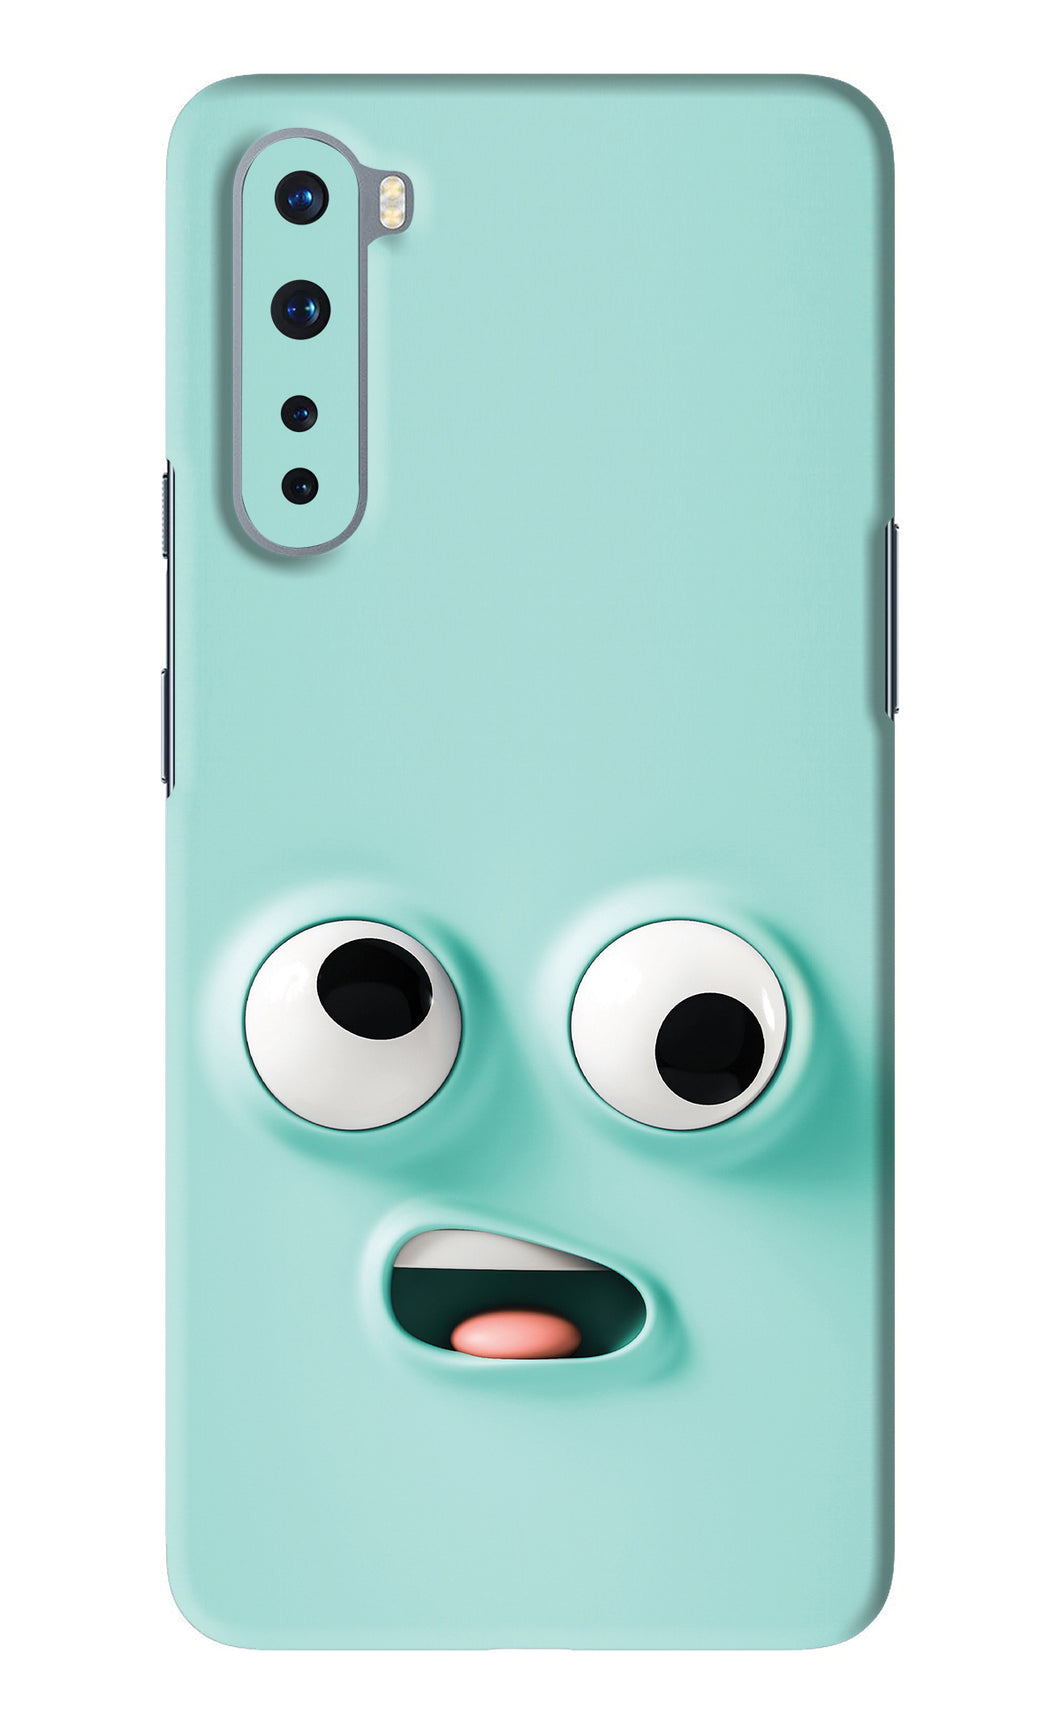 Silly Face Cartoon OnePlus Nord Back Skin Wrap